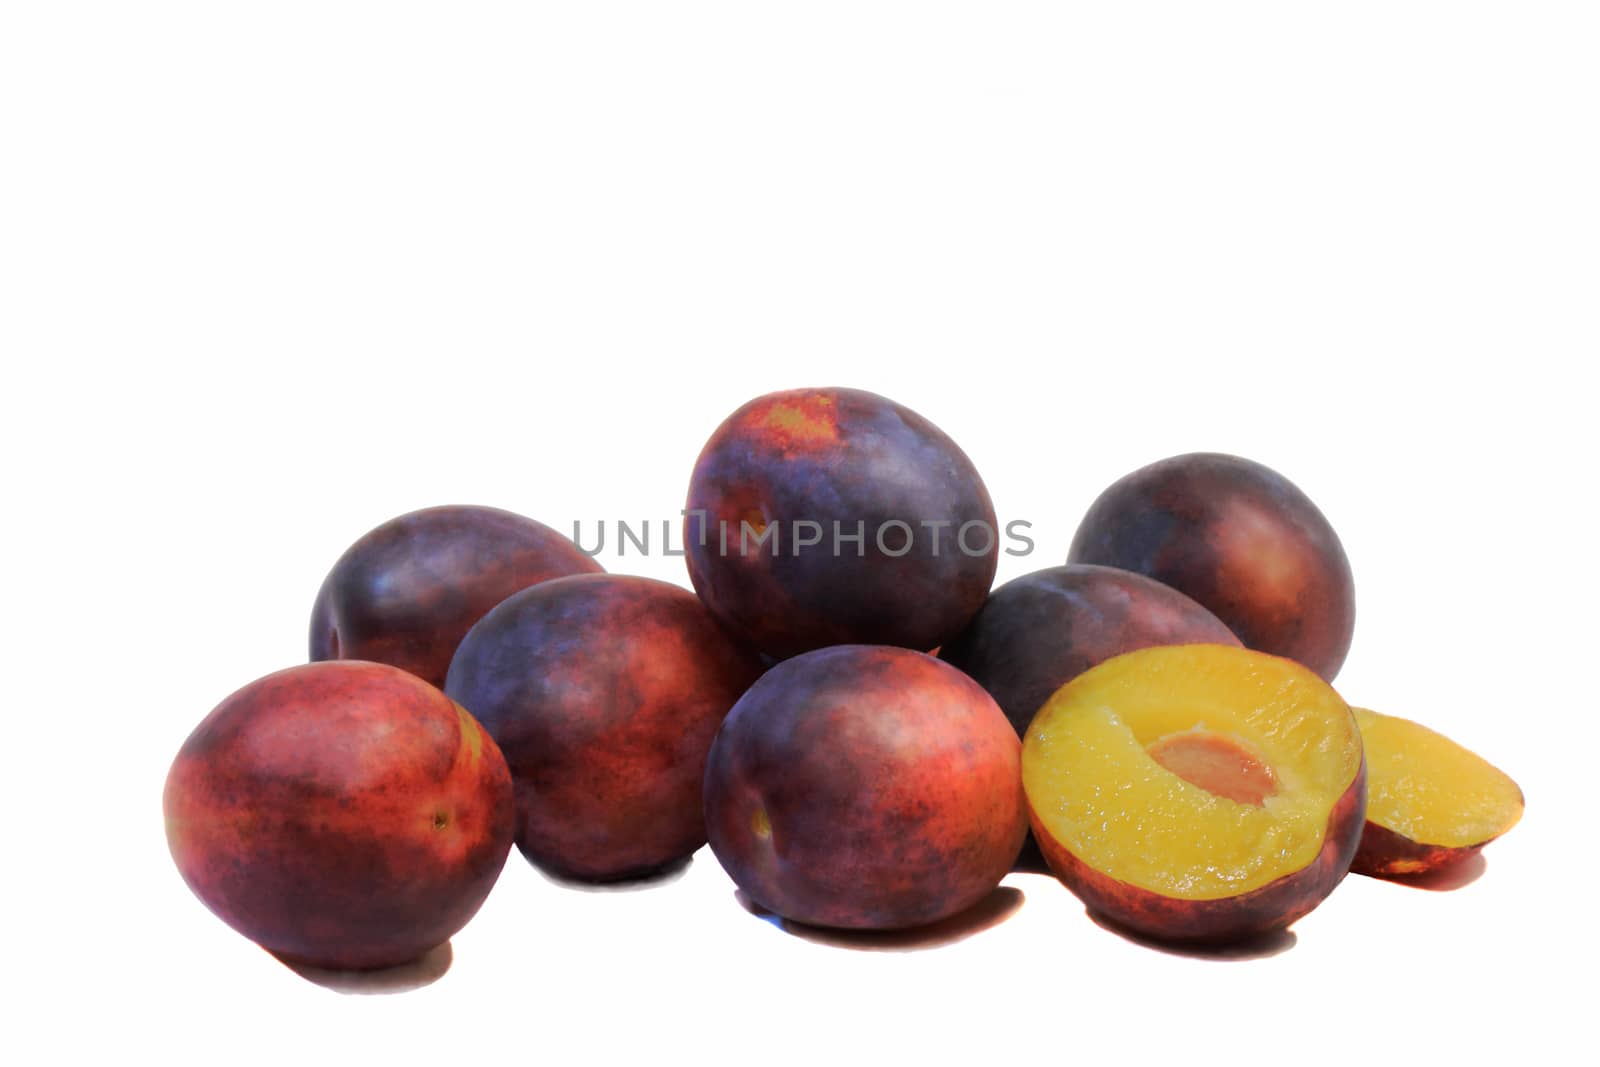 Large ripe plum and one exploded drain on white background